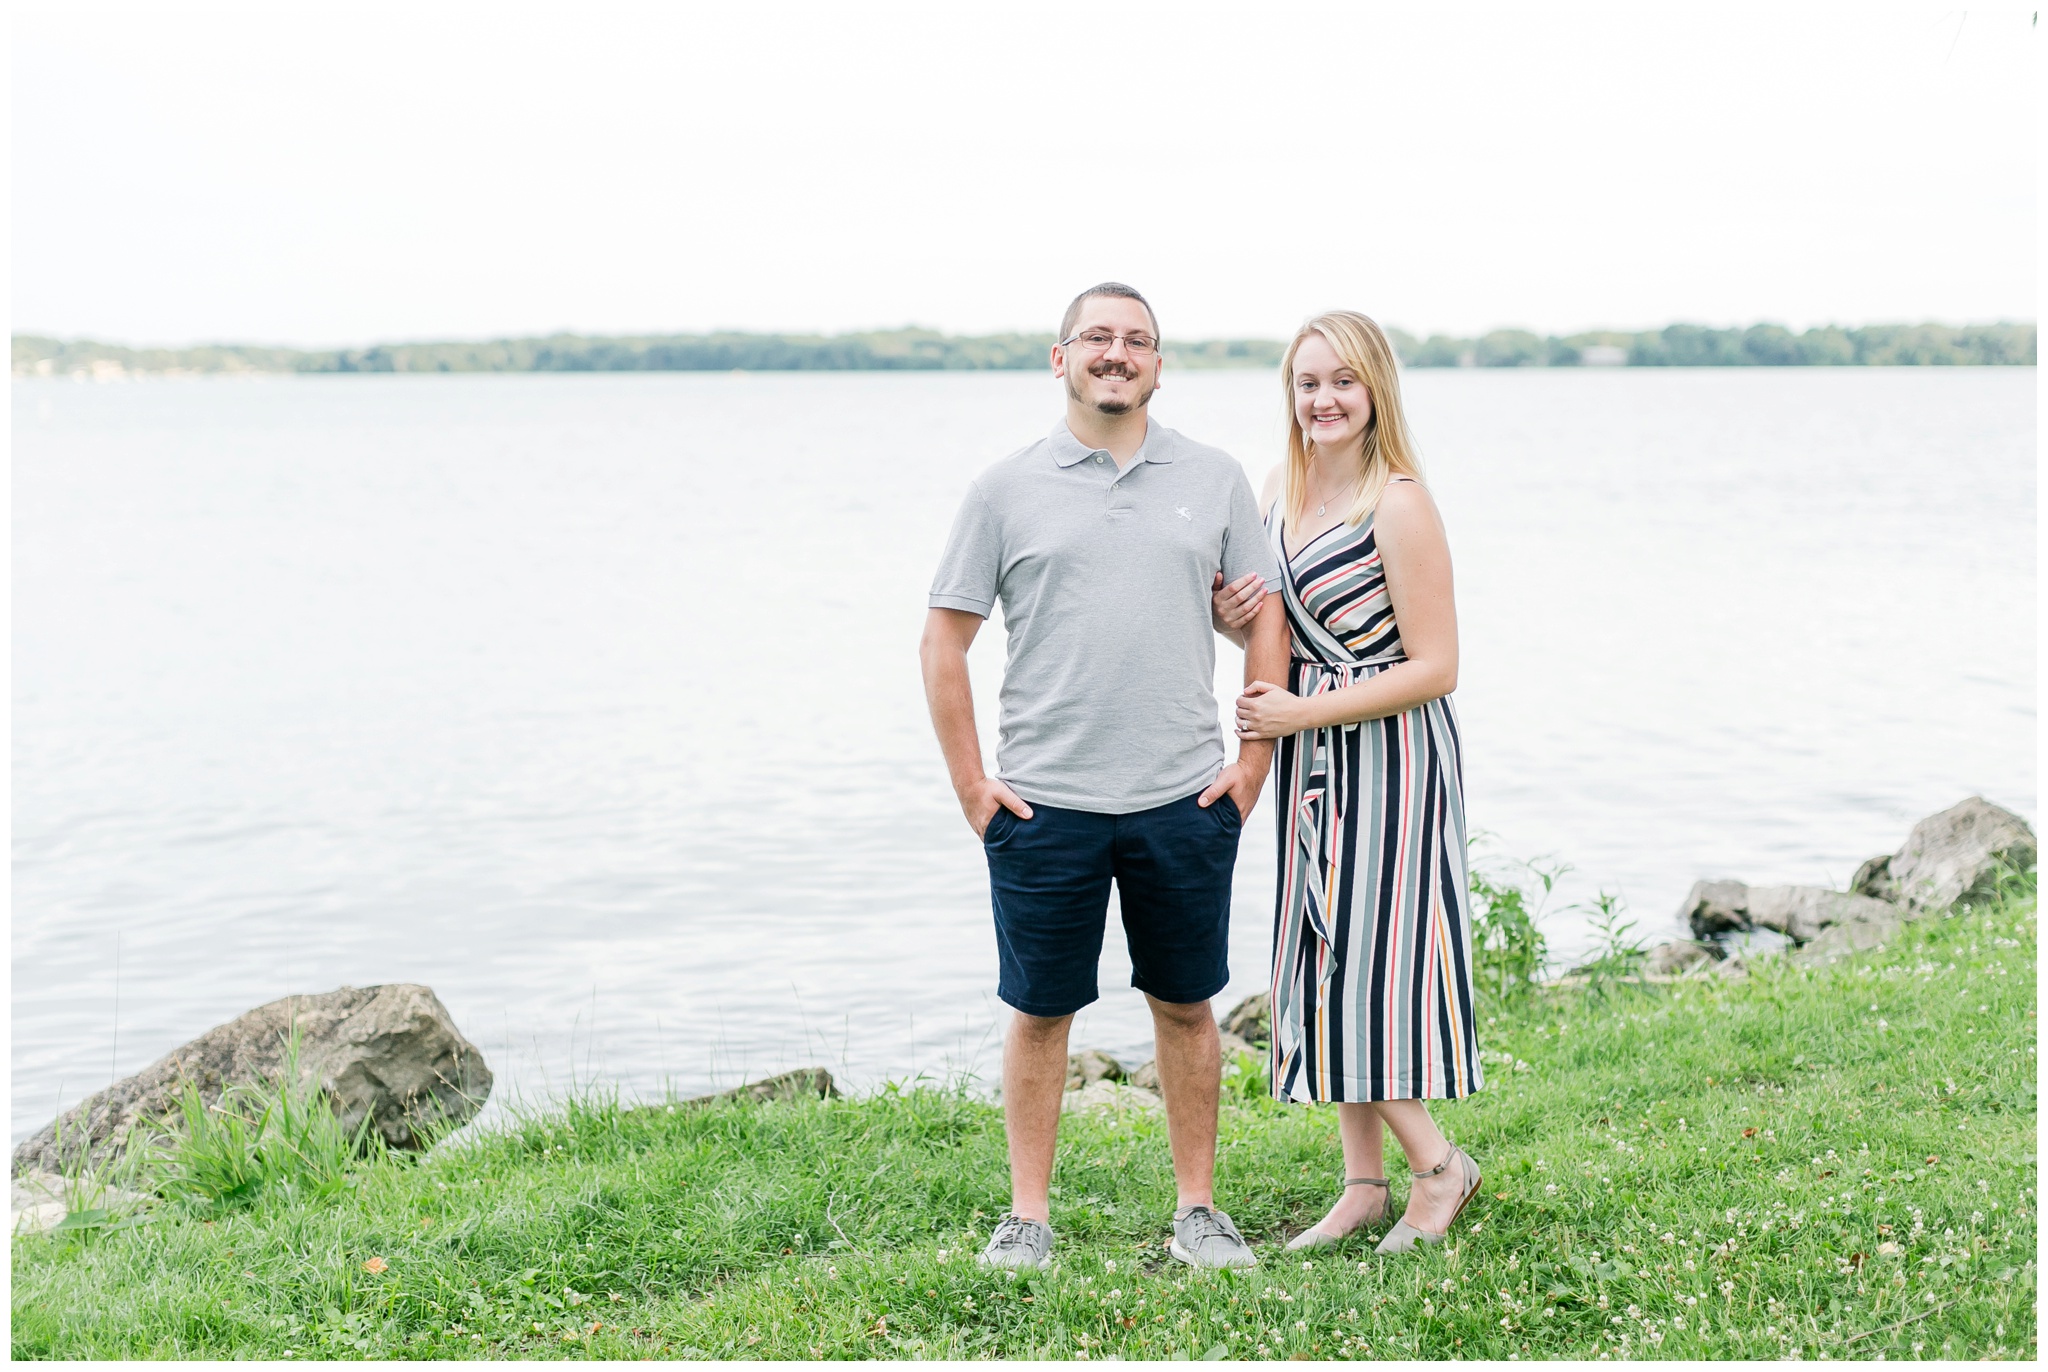 Downtown_madison_wisconsin_engagement_session_4208.jpg